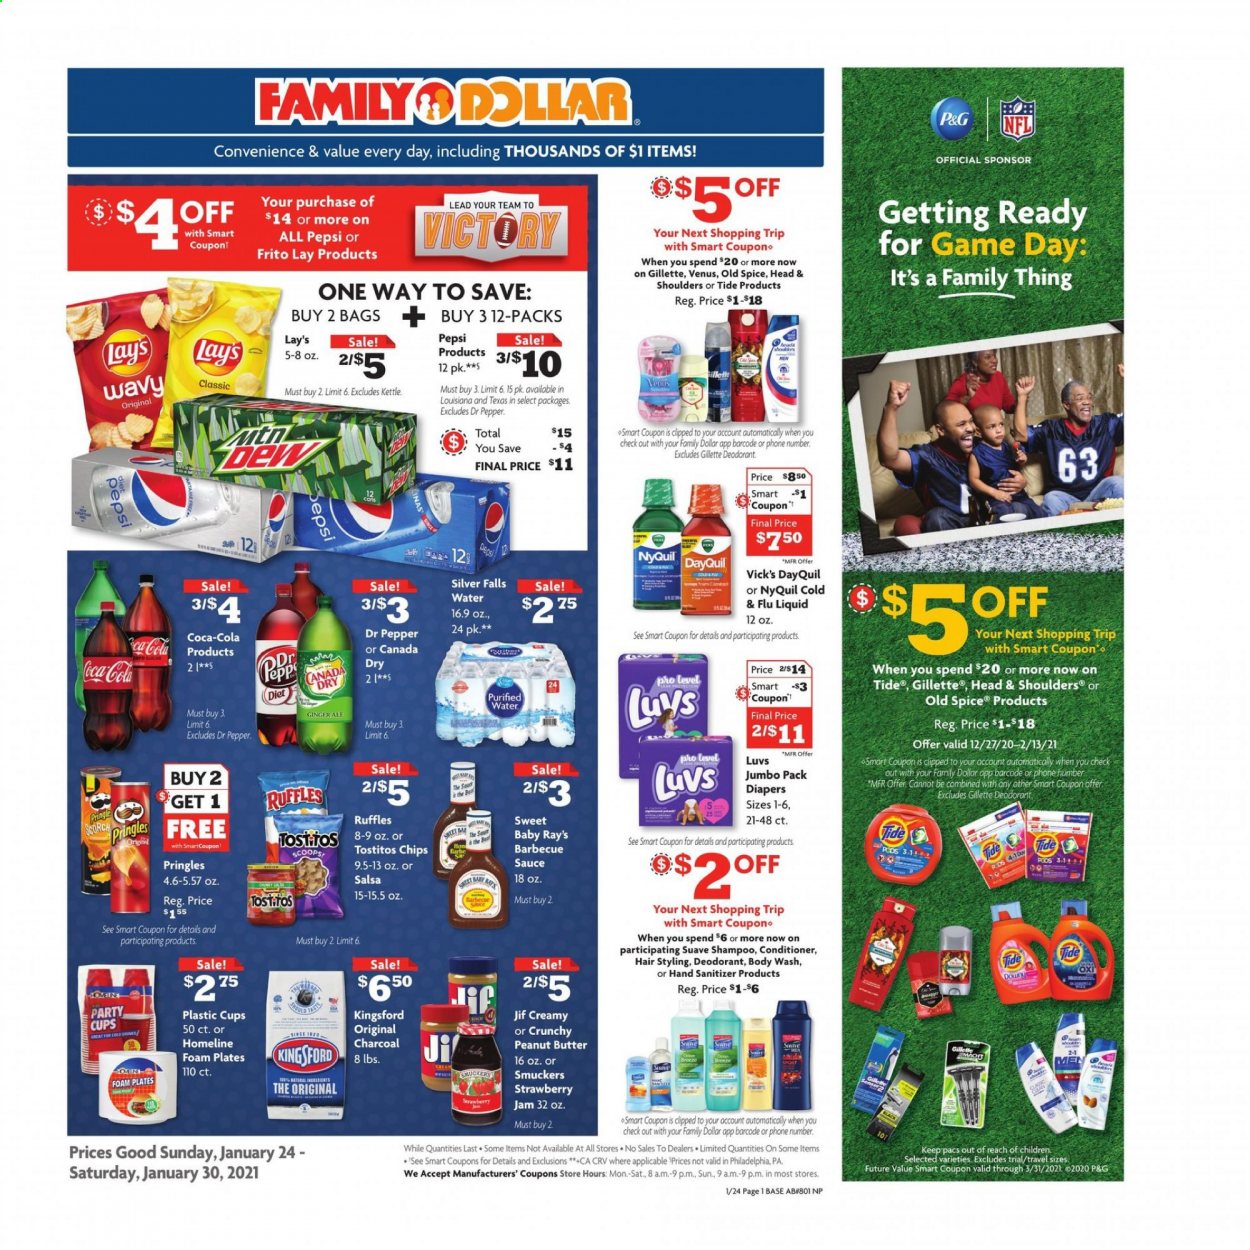 thumbnail - Family Dollar Flyer - 01/24/2021 - 01/30/2021 - Sales products - Philadelphia, salsa, Pringles, chips, Lay’s, Ruffles, Tostitos, fruit jam, peanut butter, Jif, Canada Dry, Coca-Cola, ginger ale, Pepsi, Dr. Pepper, purified water, sake, Tide, body wash, shampoo, Suave, Old Spice, conditioner, Head & Shoulders, anti-perspirant, deodorant, Gillette, Venus, hand sanitizer, plate, party cups, cup, foam plates, charcoal, DayQuil, Cold & Flu, NyQuil. Page 1.